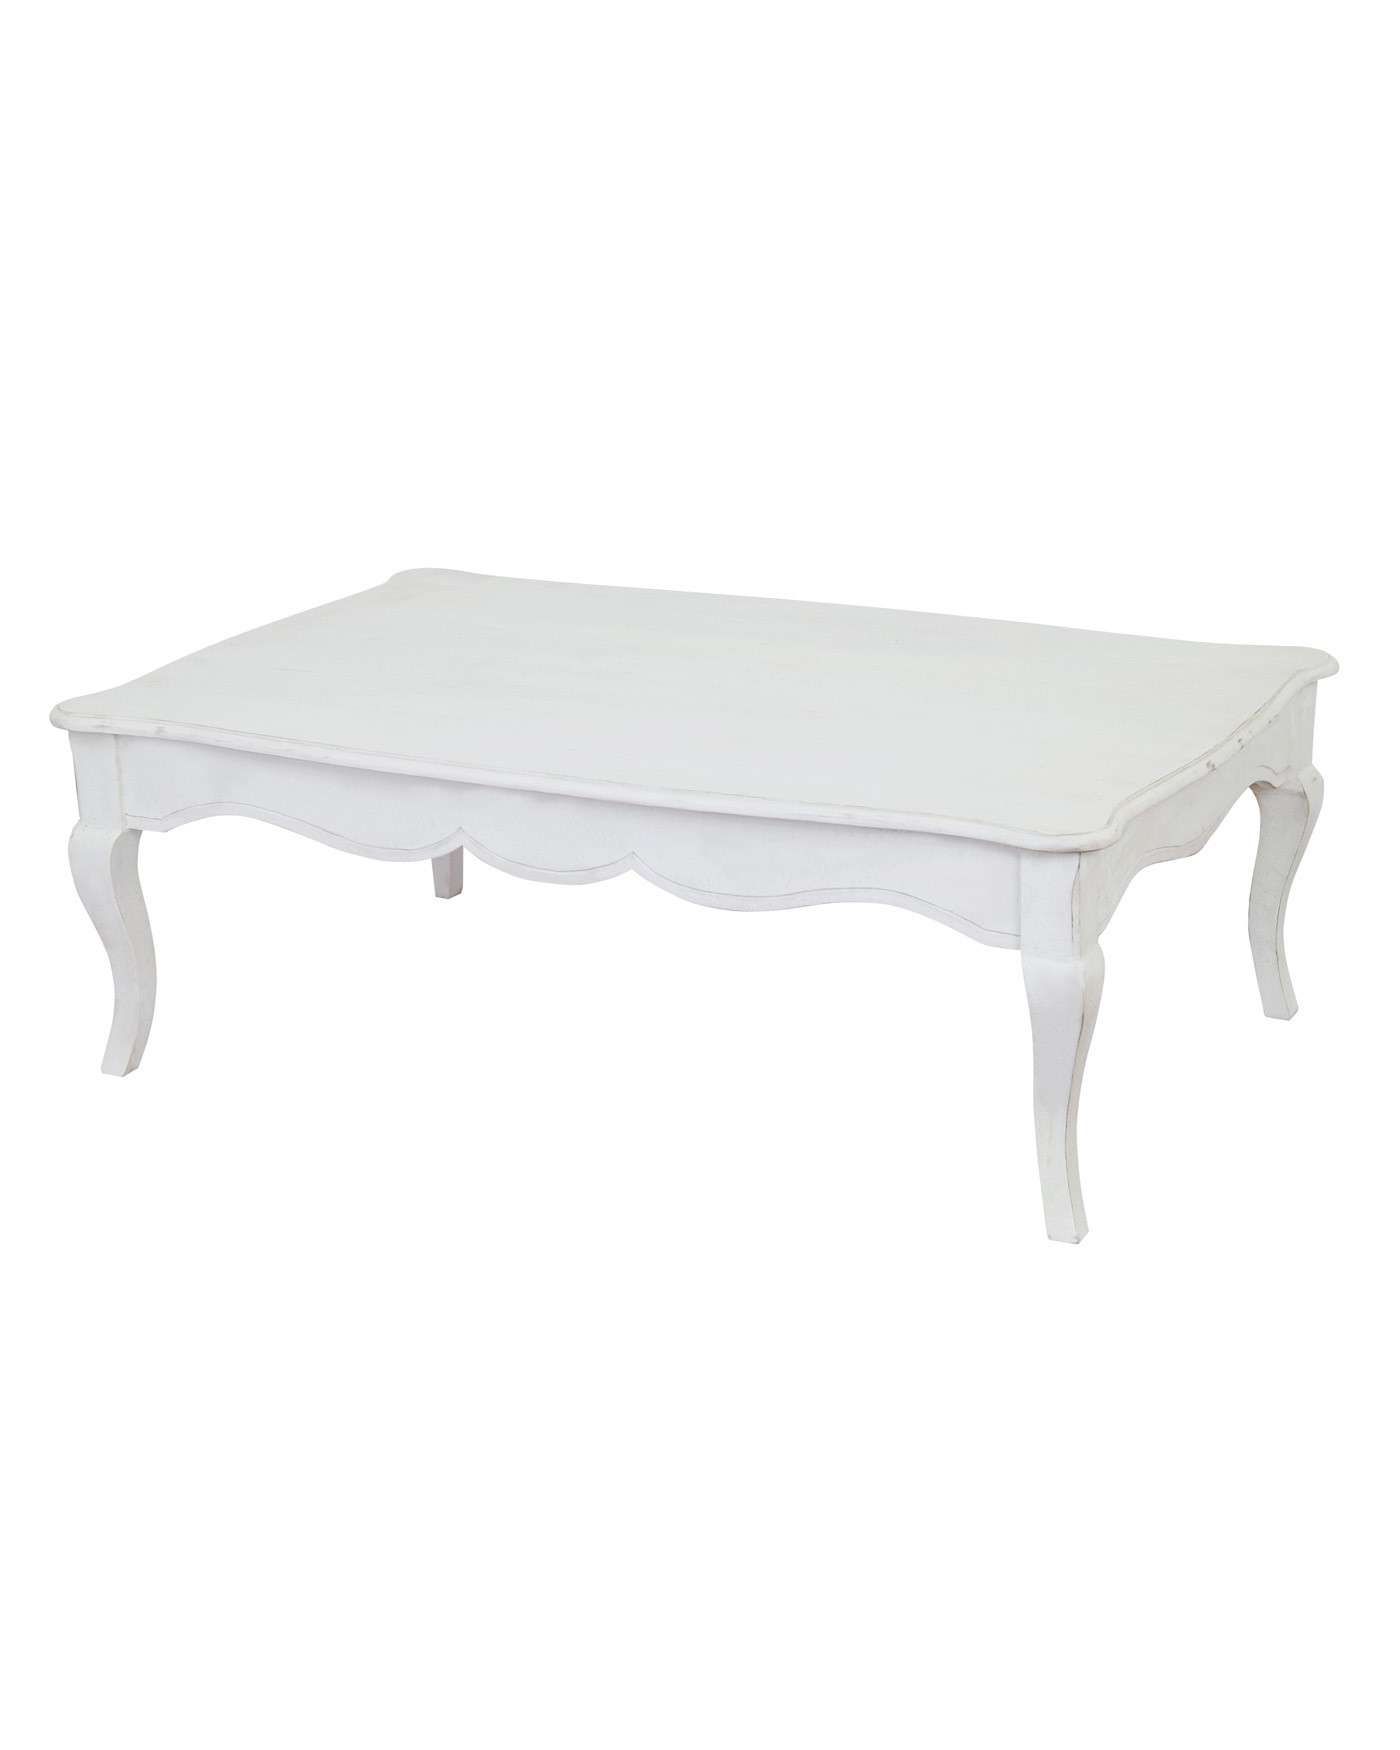 New Orleans Distressed White Vintage Coffee Table With Cabriole Within Most Up To Date Retro White Coffee Tables (View 1 of 20)